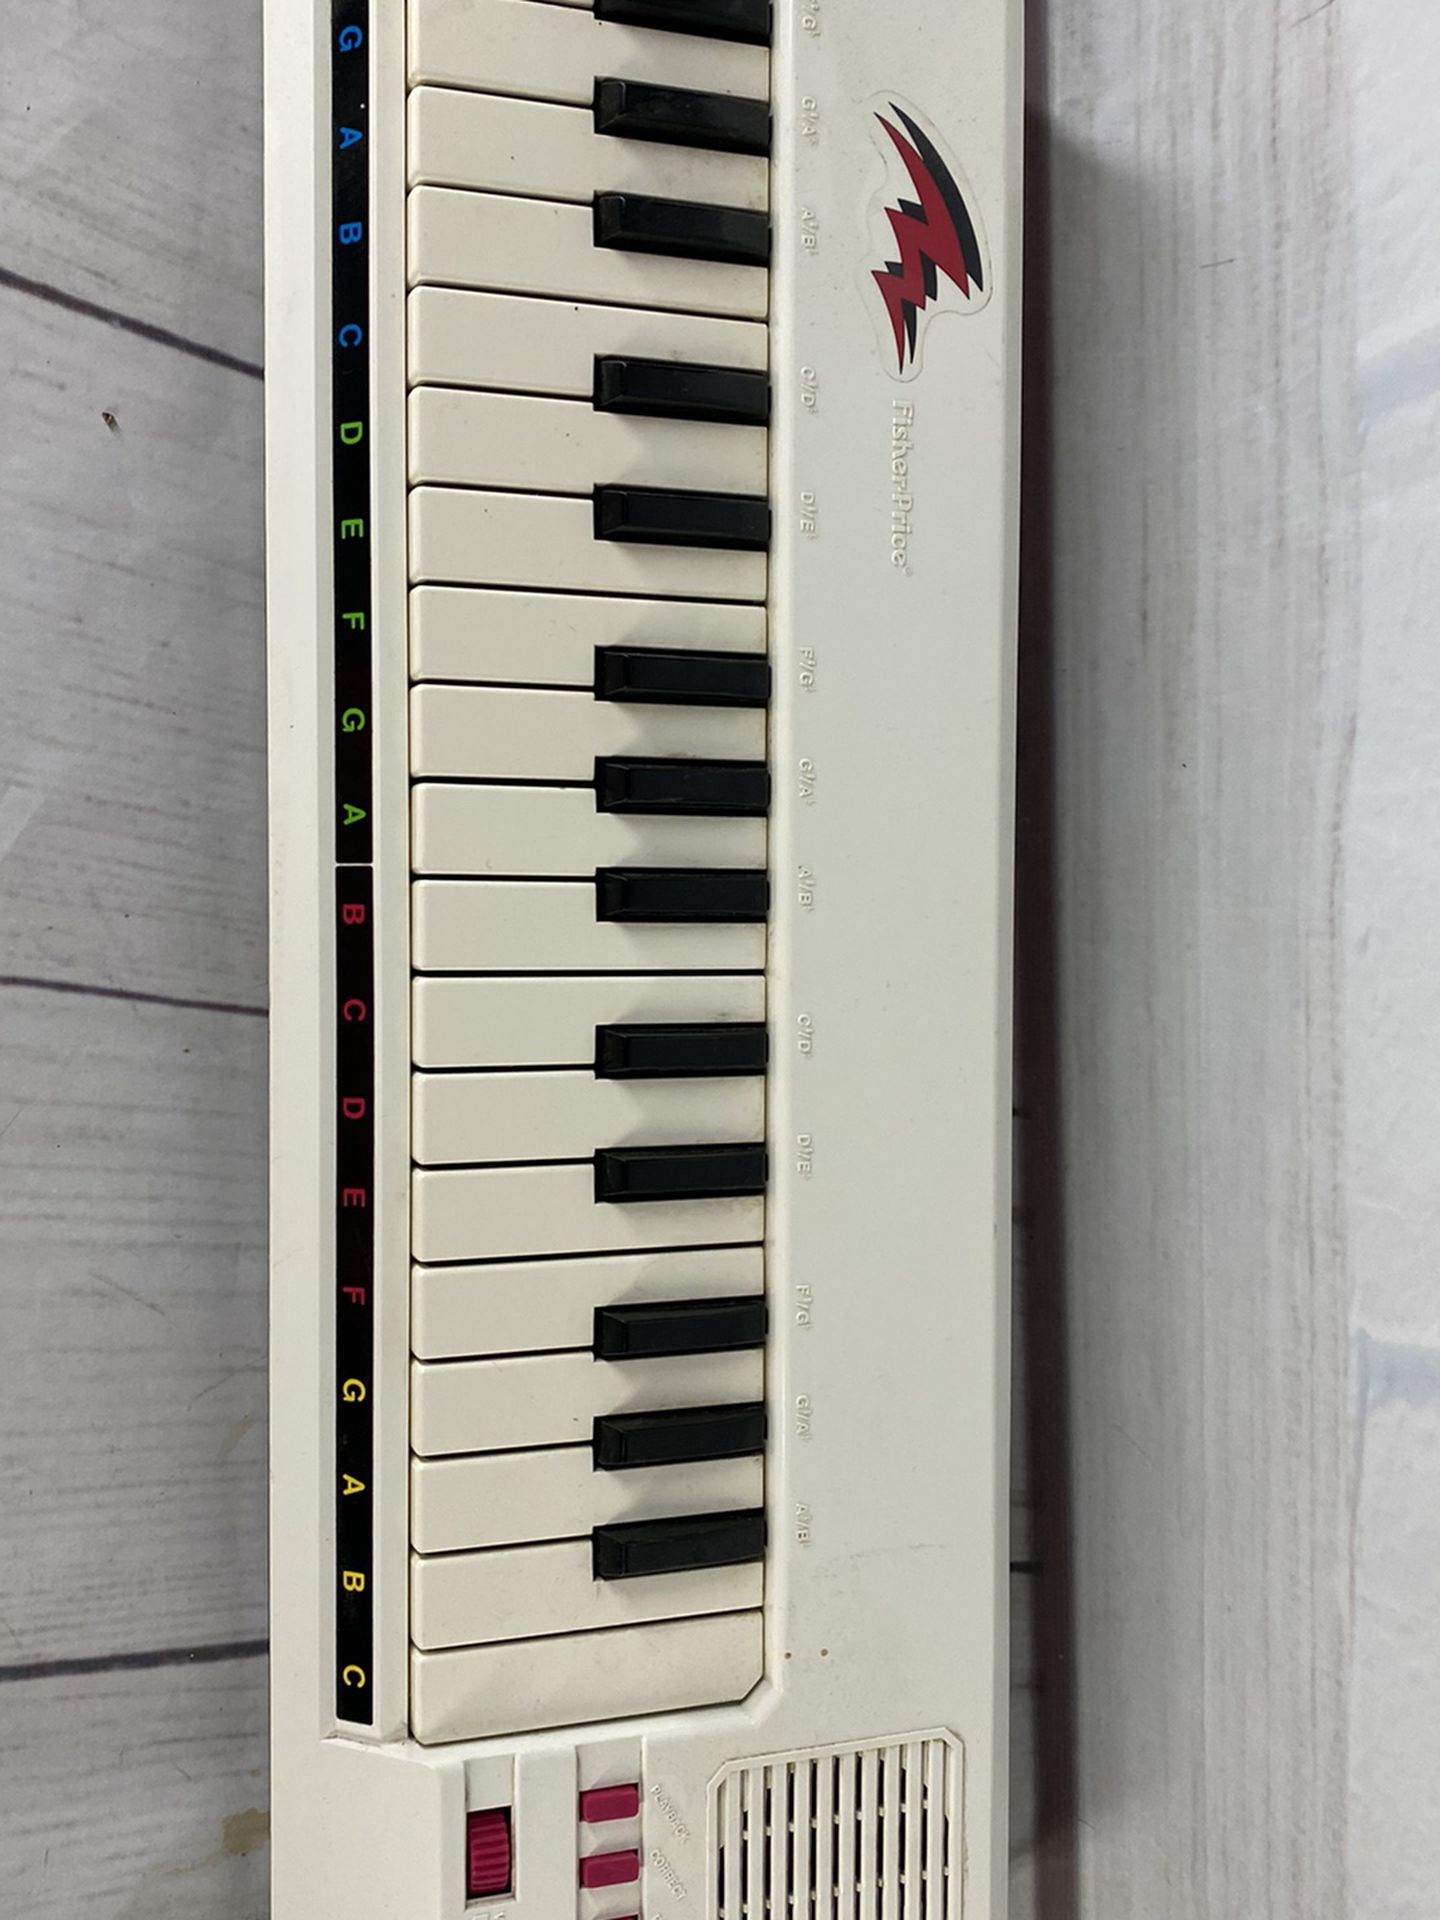 VTG 1988 FISHER PRICE 3810 KEYBOARD PIANO MUSICAL INSTRUMENT TESTED WORKS